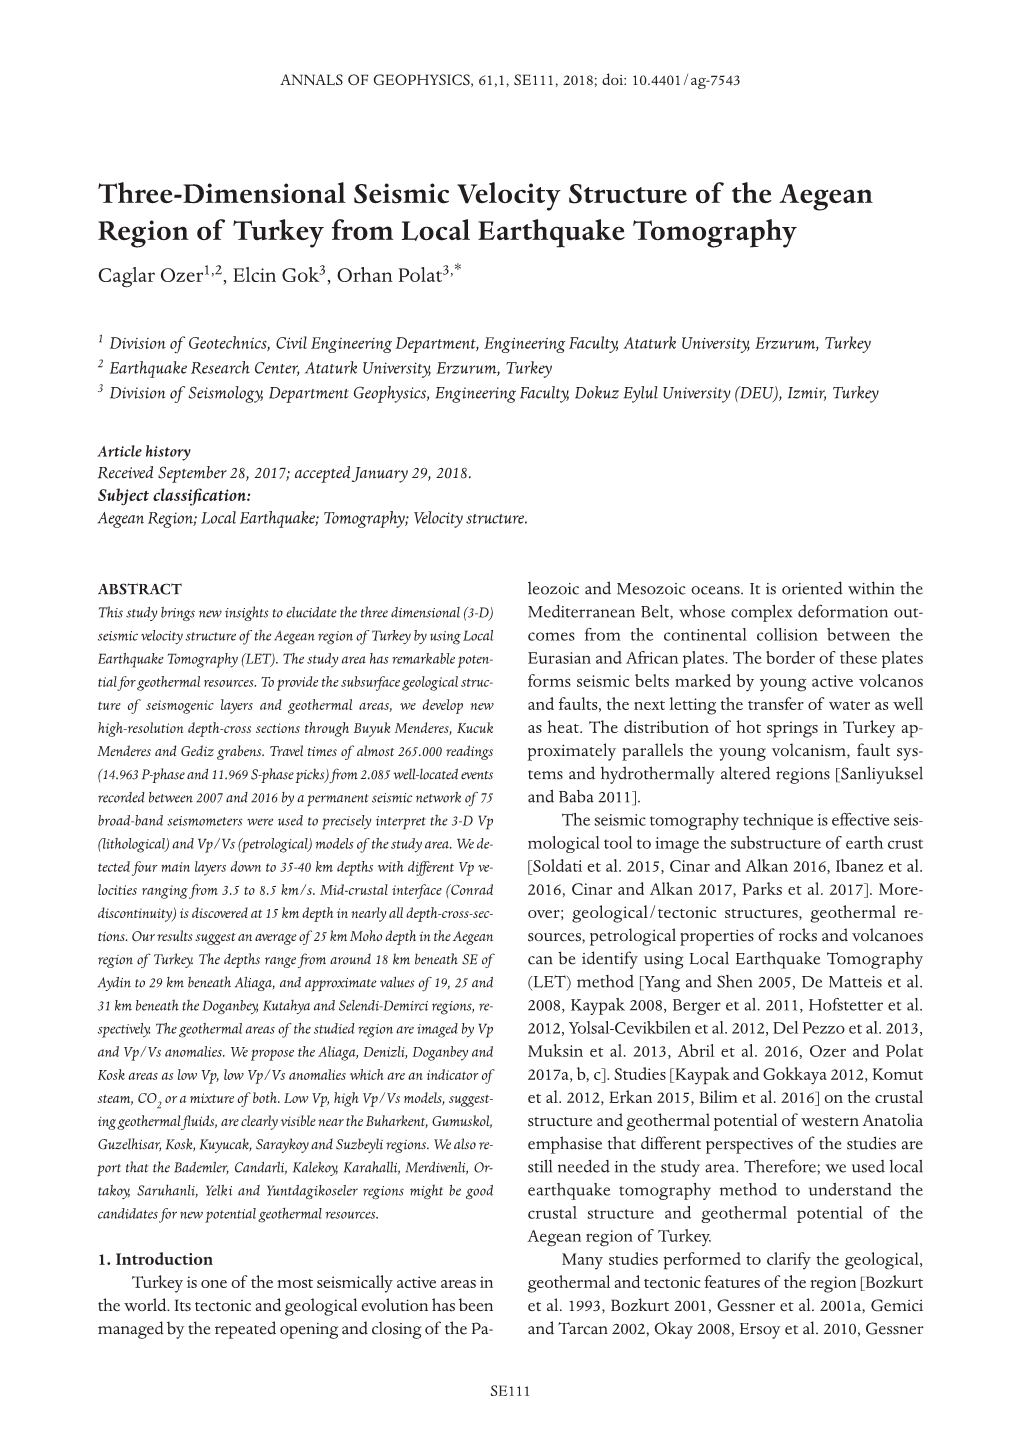 Three-Dimensional Seismic Velocity Structure of the Aegean Region of Turkey from Local Earthquake Tomography